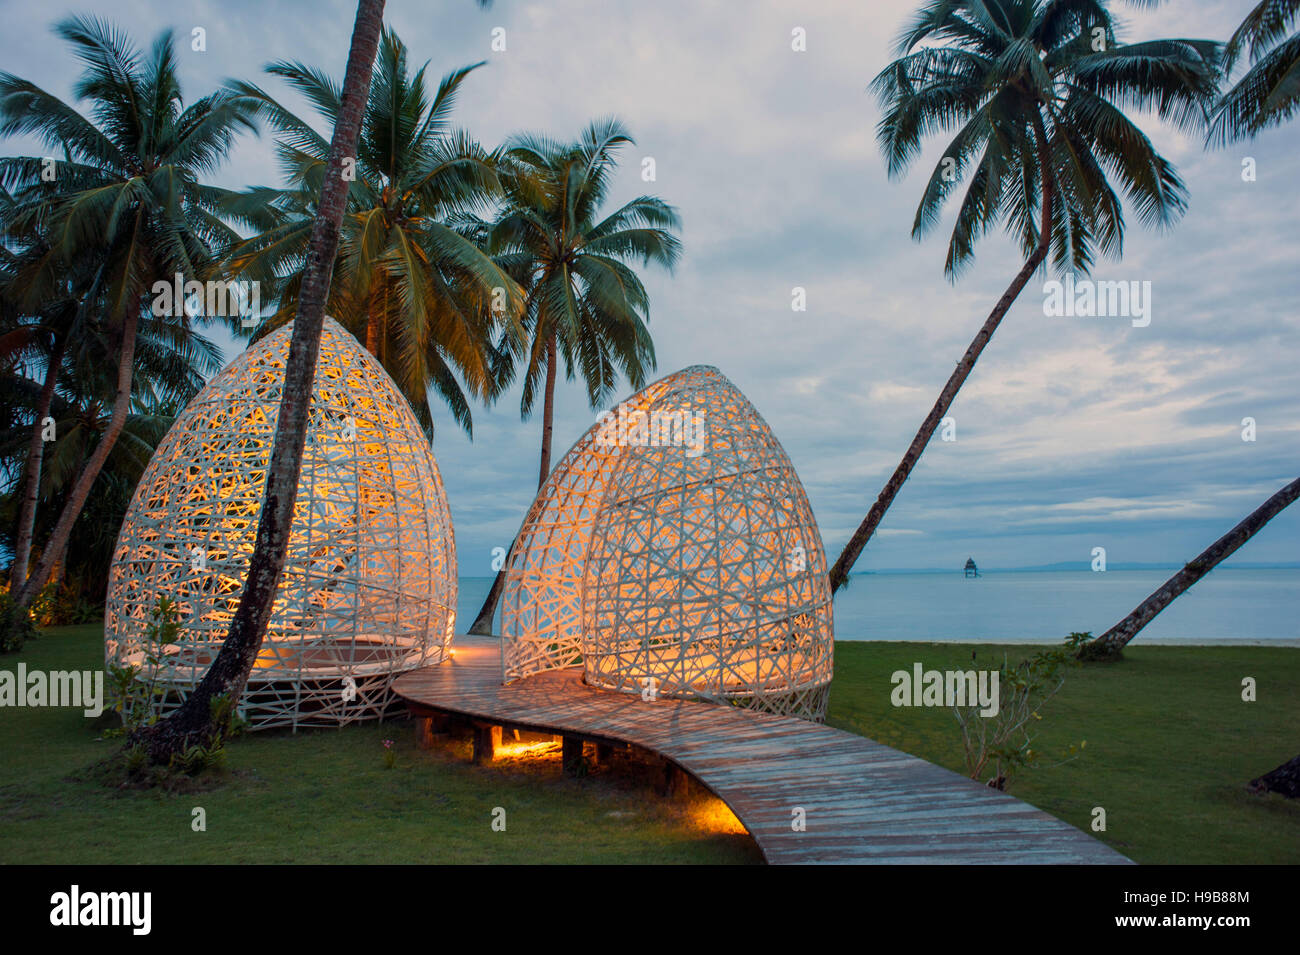 A sculpture at Dedon Island resort, the 'outdoor lab' of Dedon furniture, a line of high-end outdoor furniture made from recycled plastic. Stock Photo